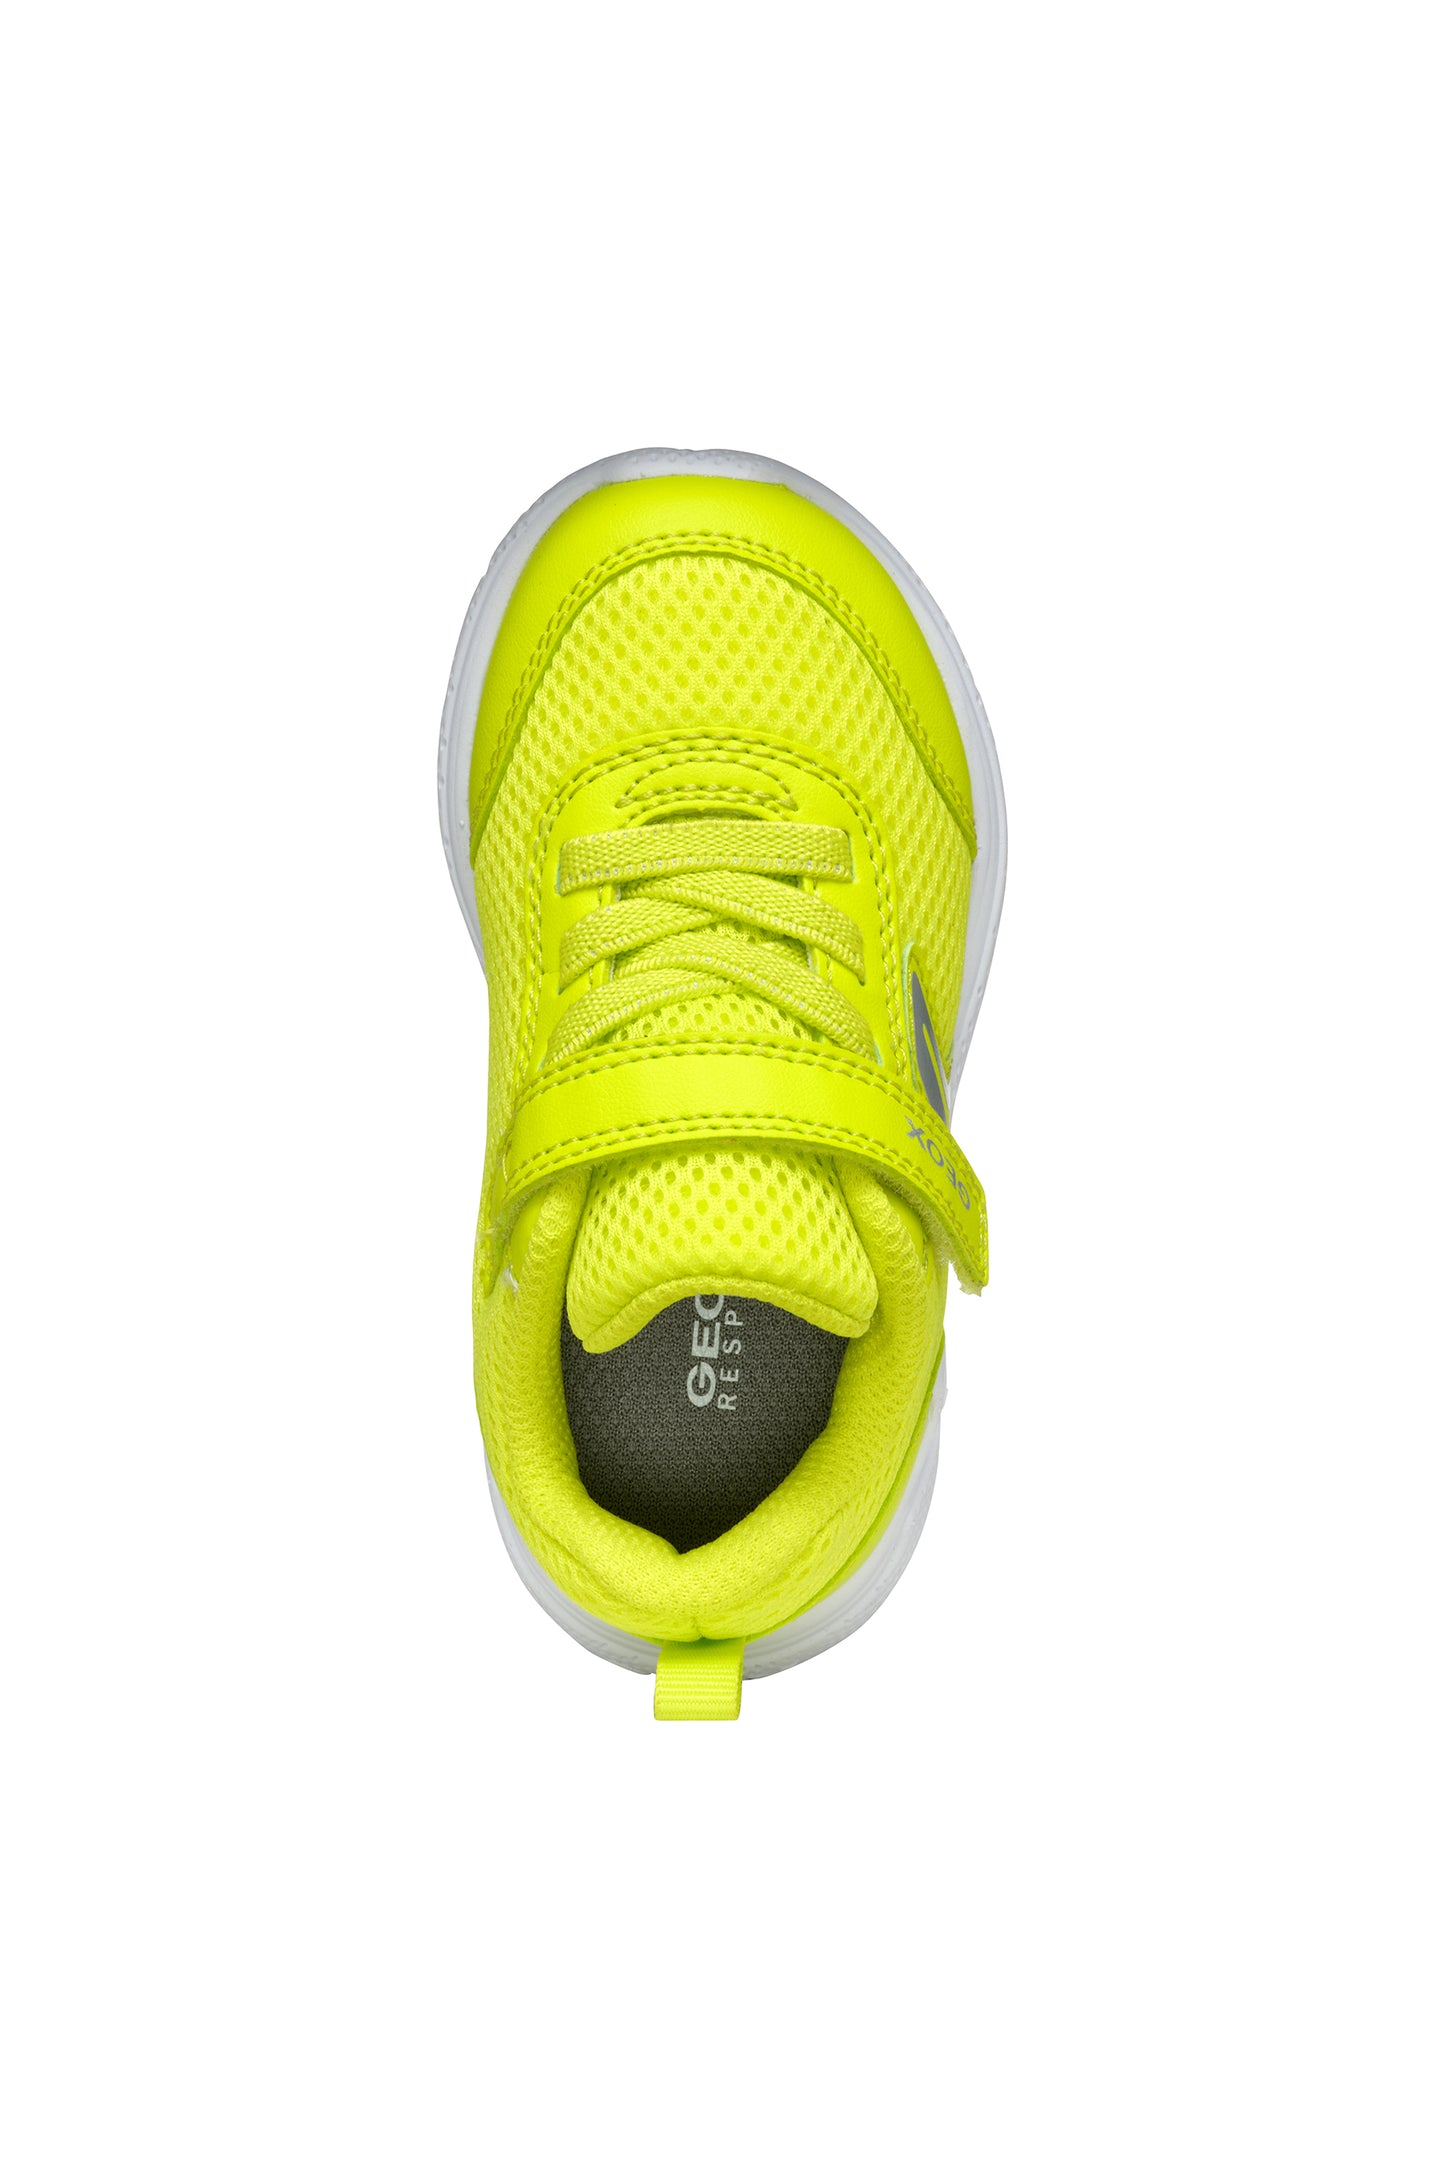 A unisex trainer by Geox, style B Sprintye, in fluorescent green with bungee lace and velcro fastening. View from above.